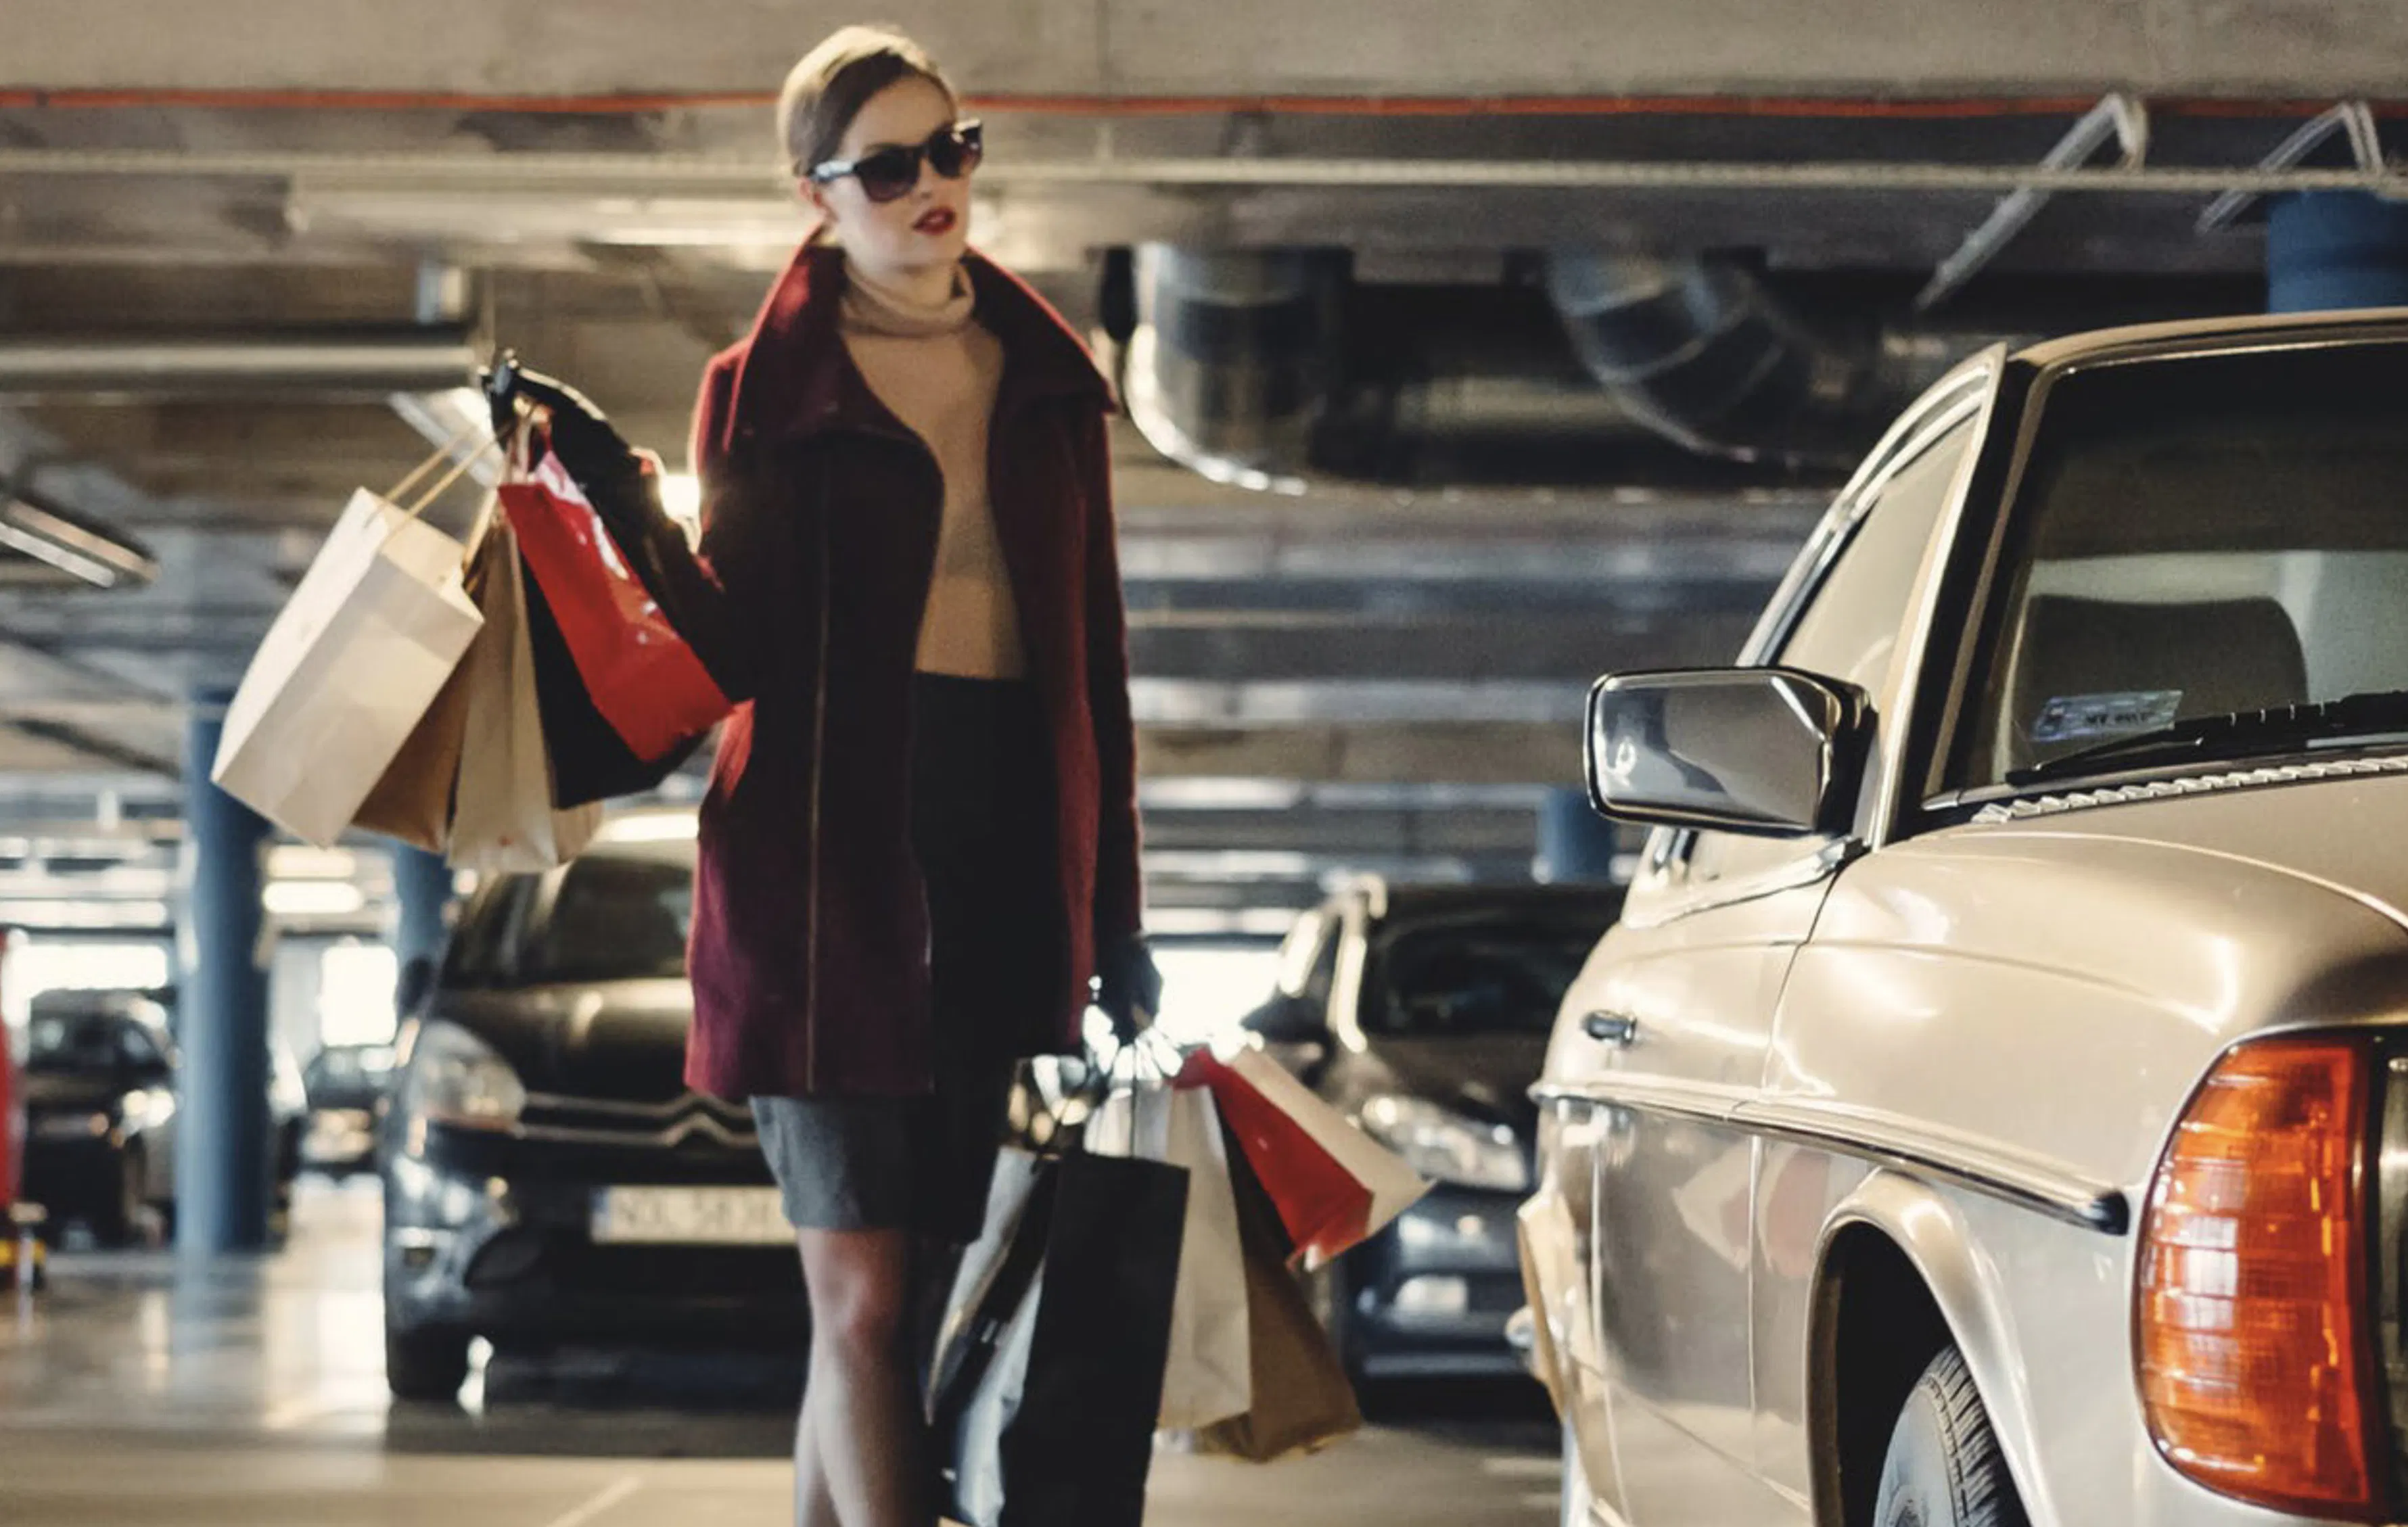 Woman shopping walking to a car in parking lot picture